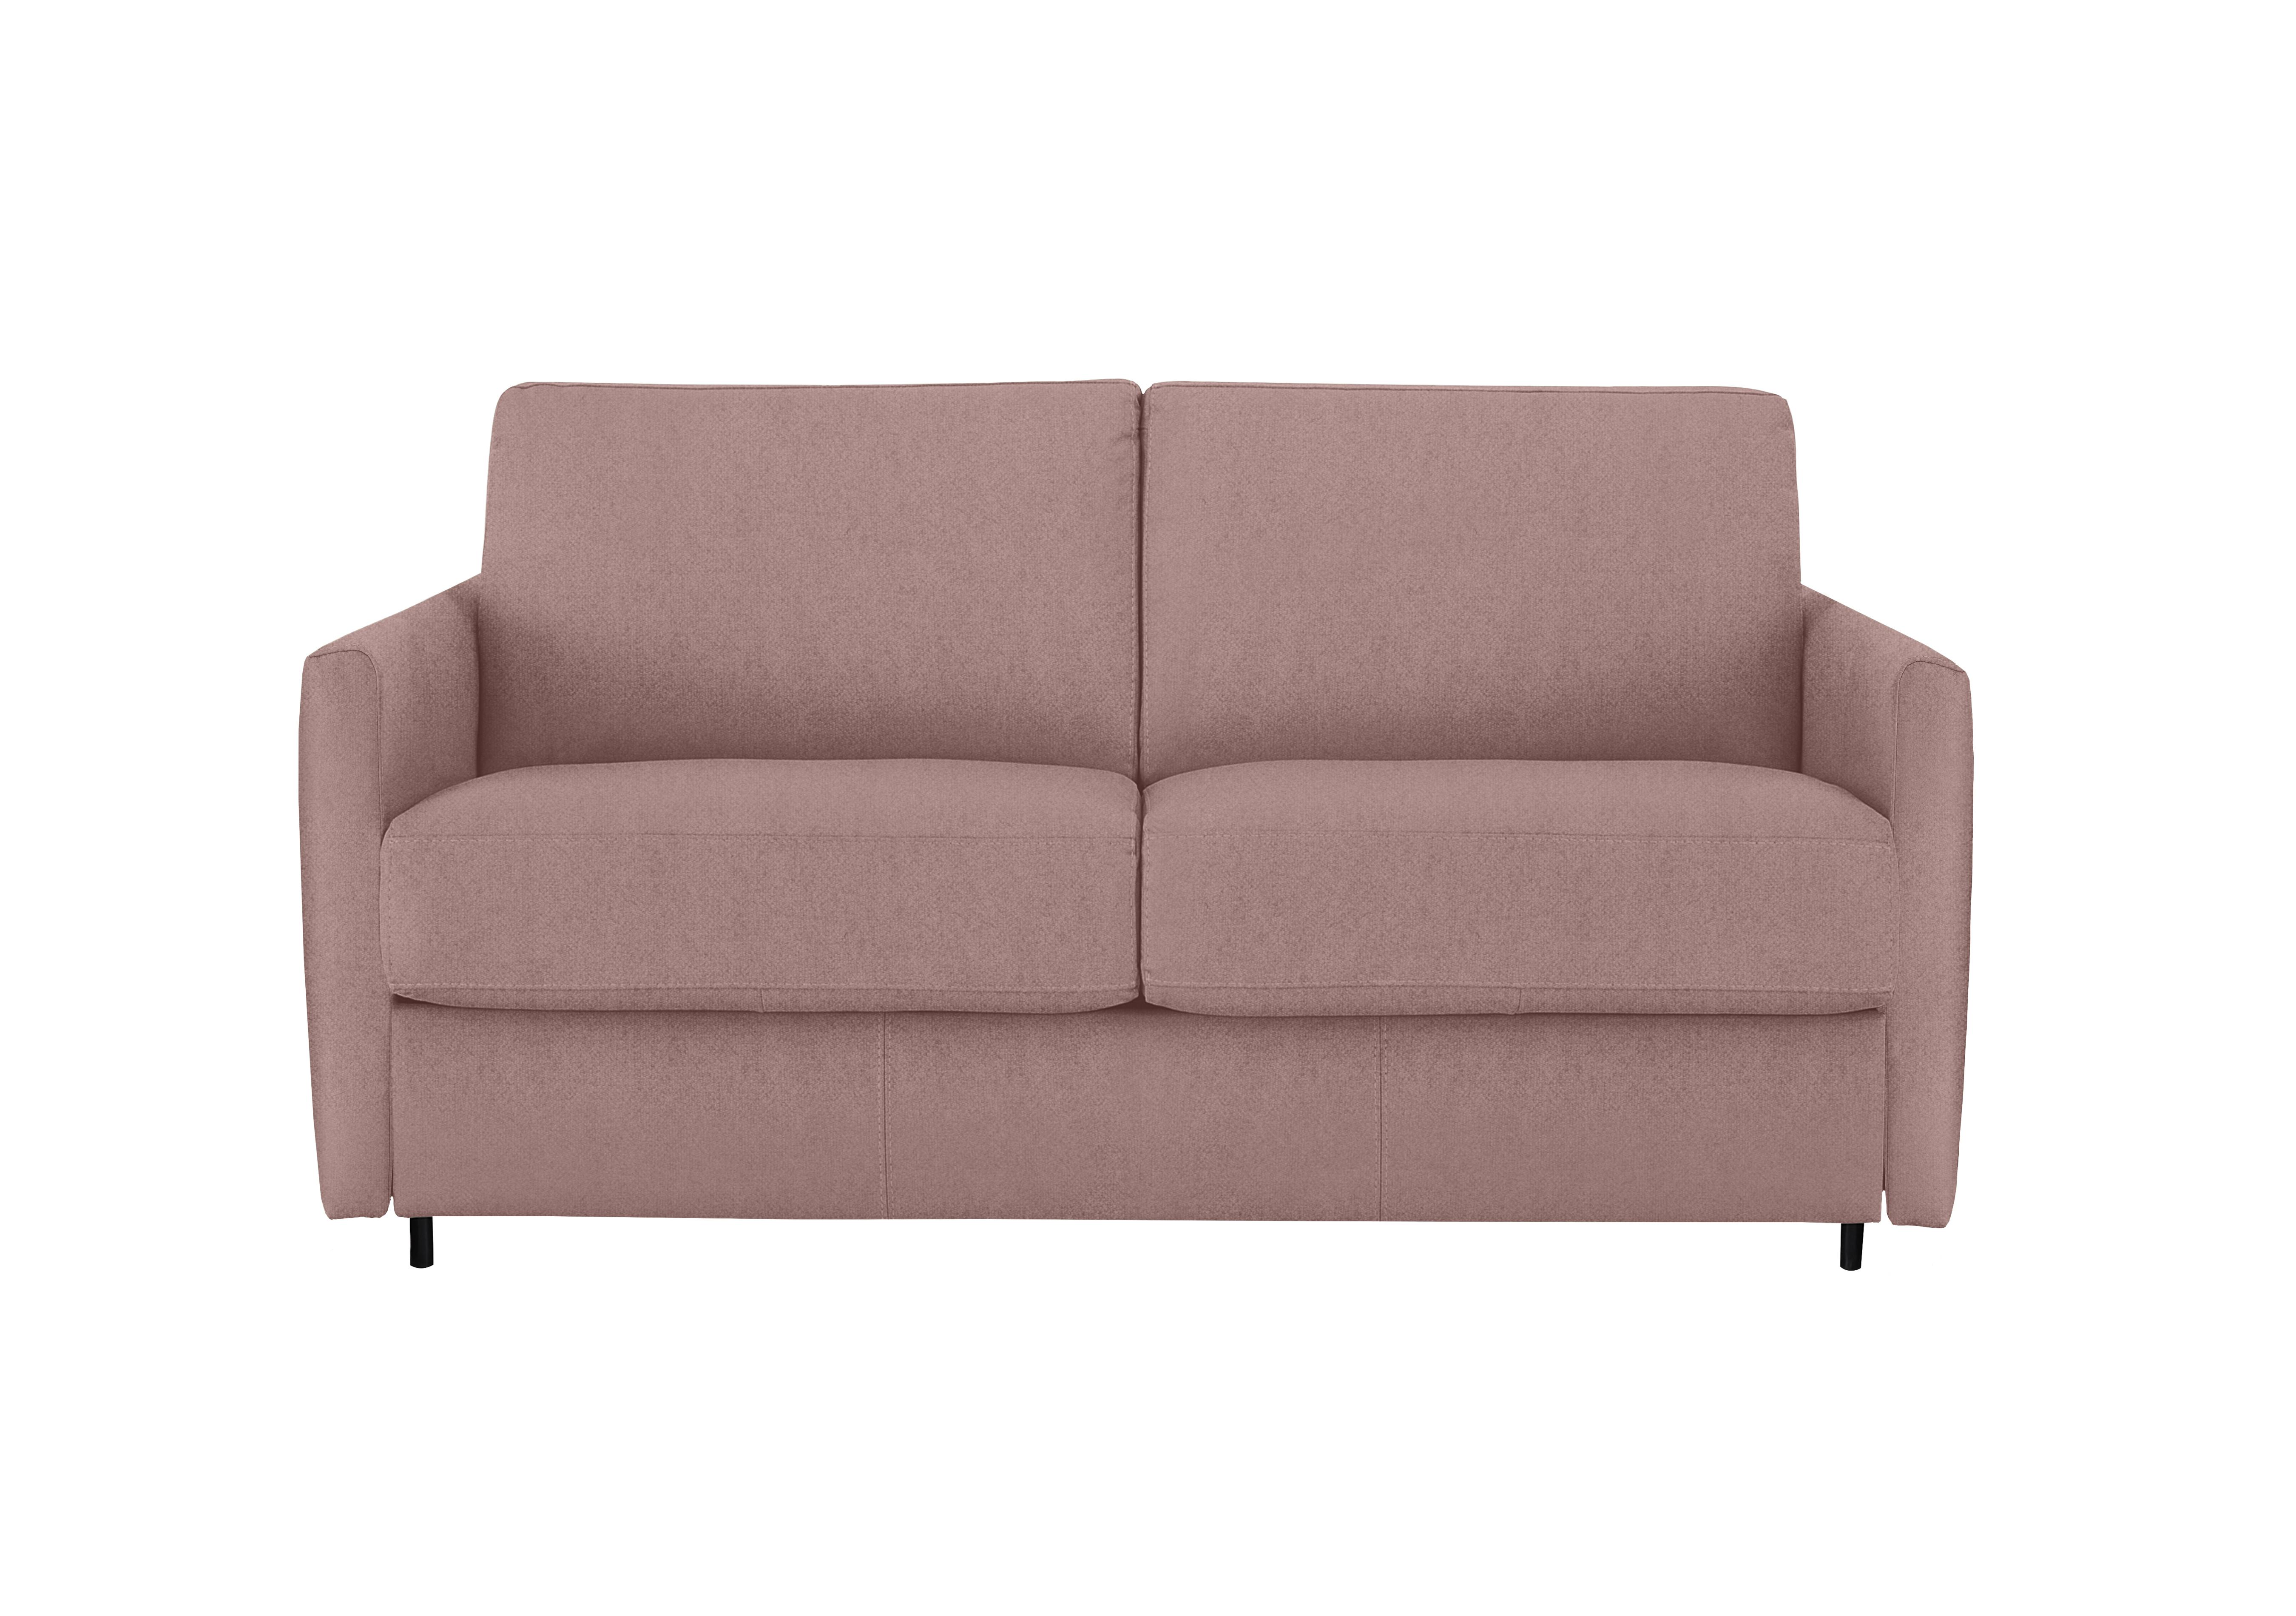 Alcova 2 Seater Fabric Sofa Bed with Slim Arms in Fuente Coral on Furniture Village